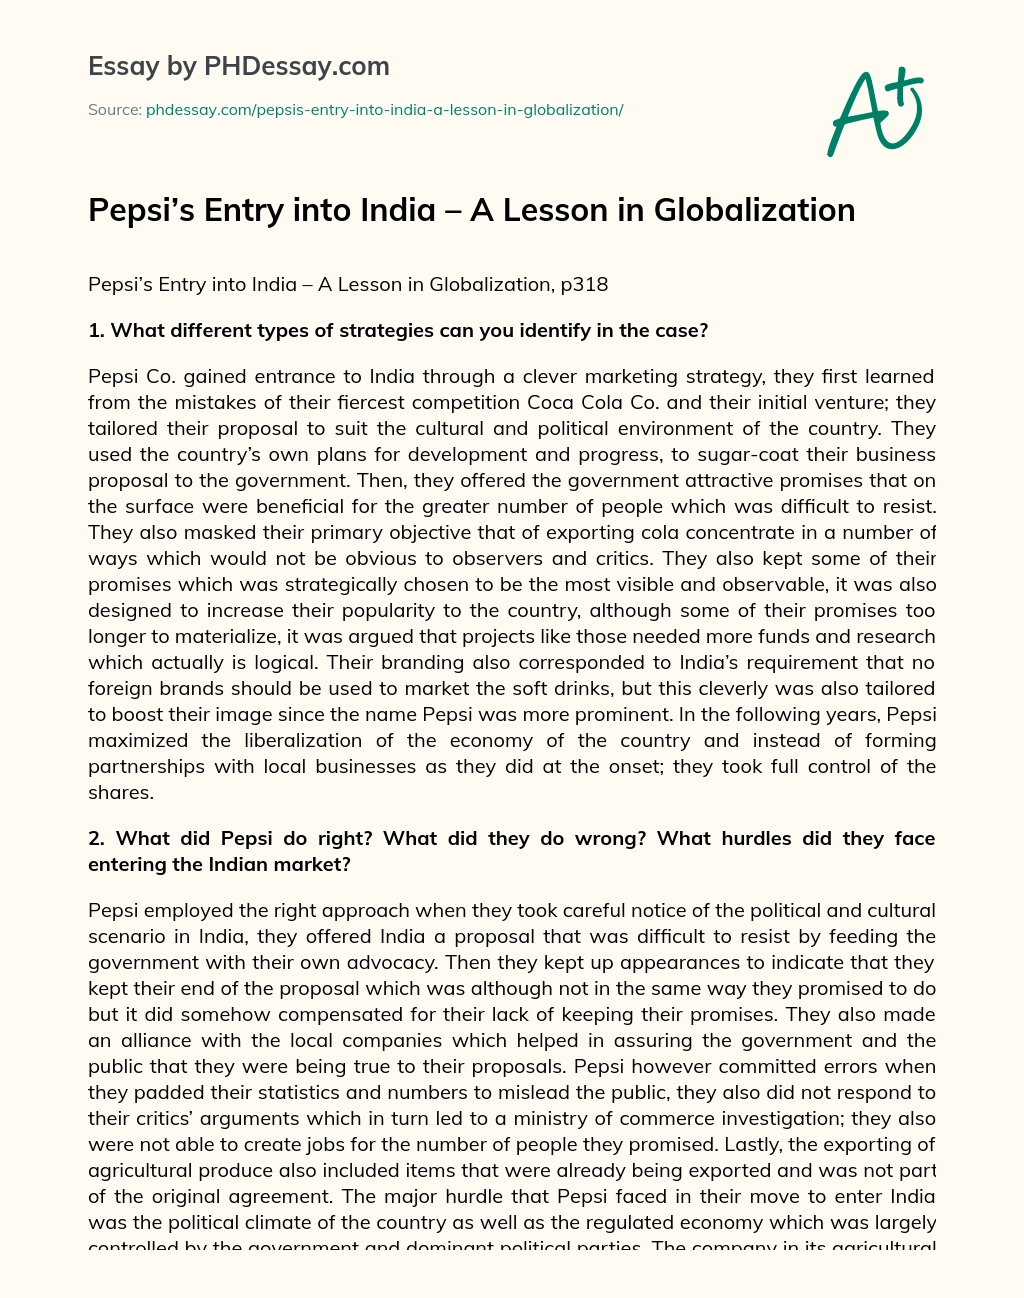 Pepsi’s Entry into India – A Lesson in Globalization essay